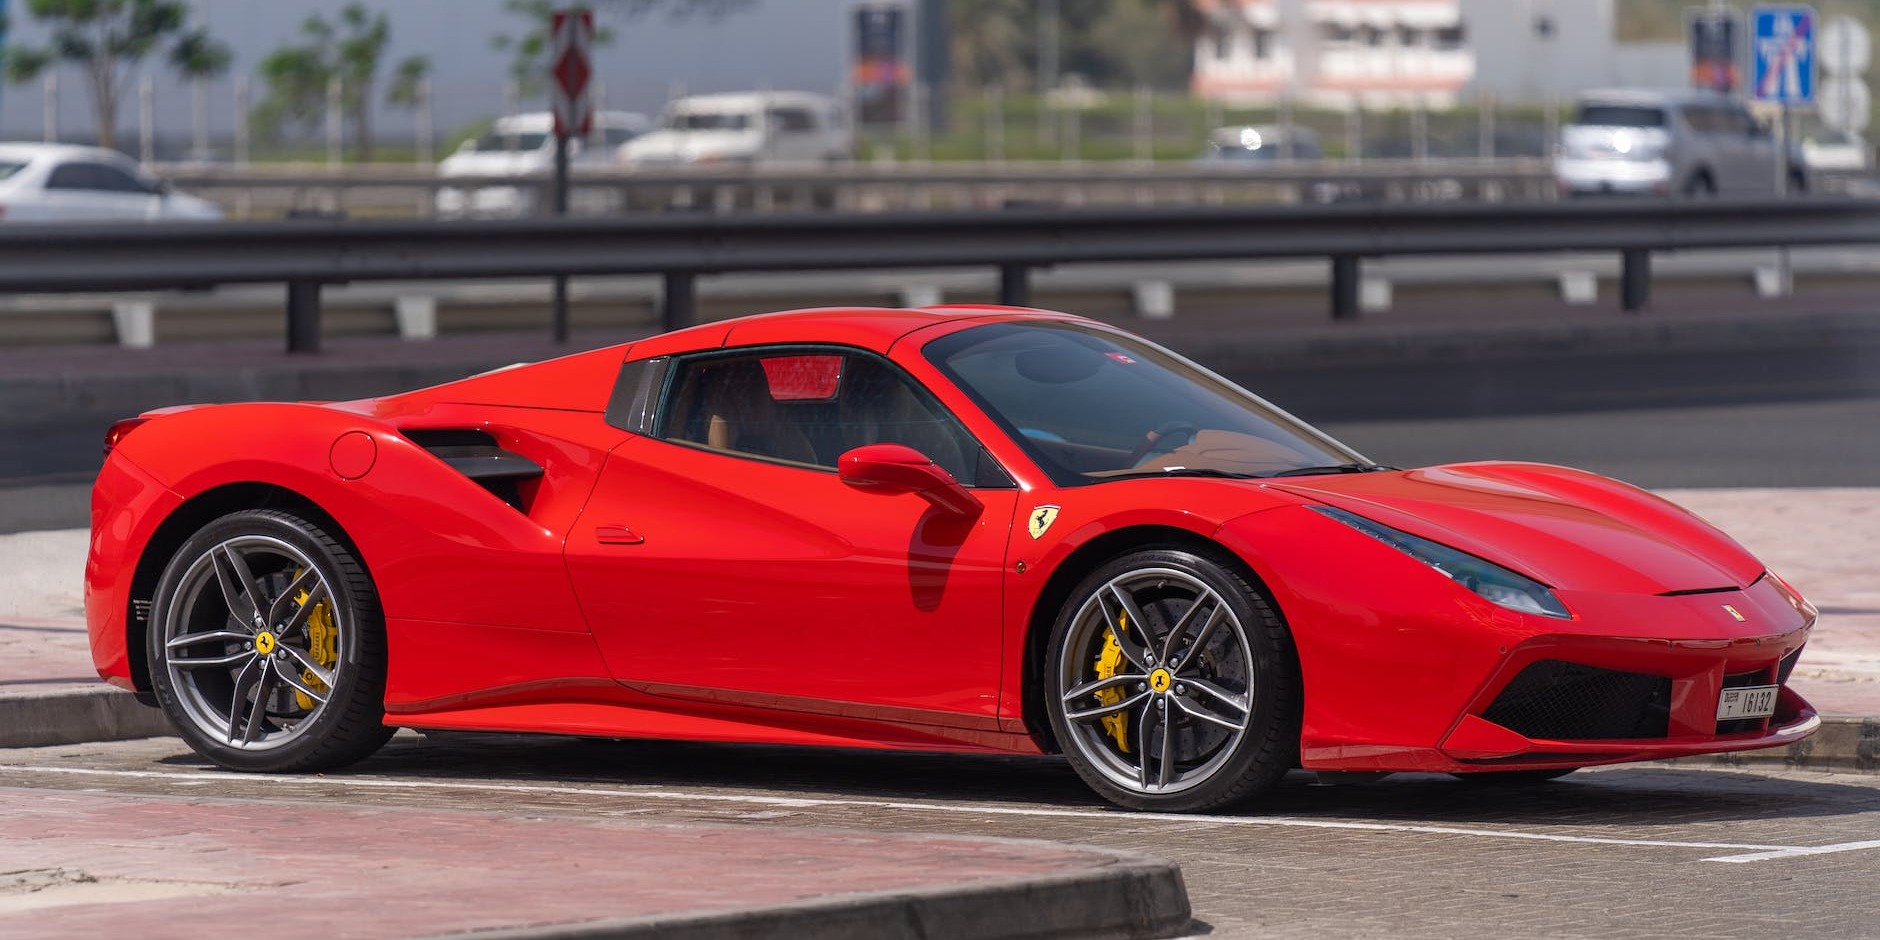 Top Tips for a Memorable UK Road Trip in a Hired Ferrari